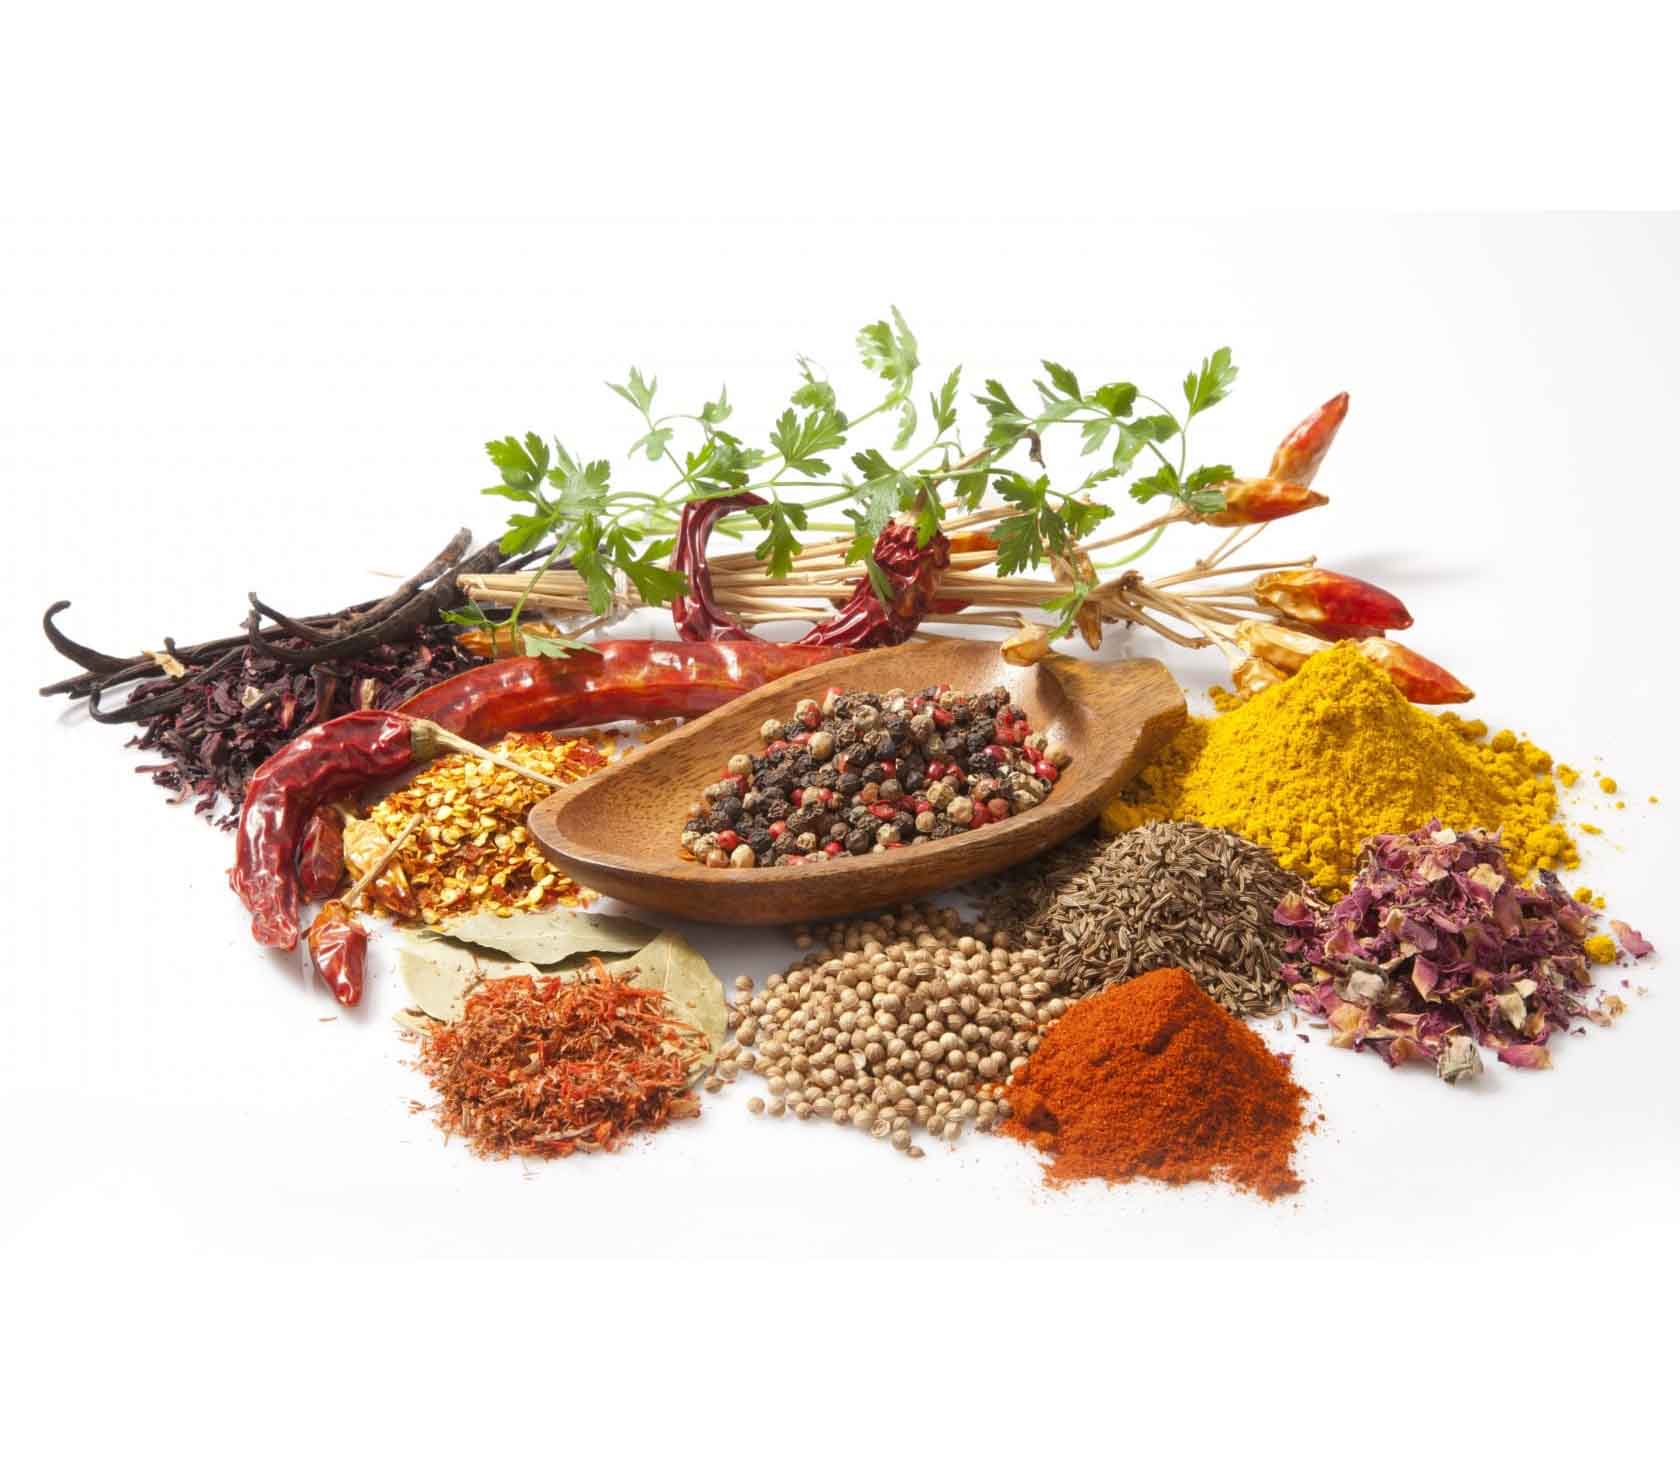 Dehydrated herbs and spices